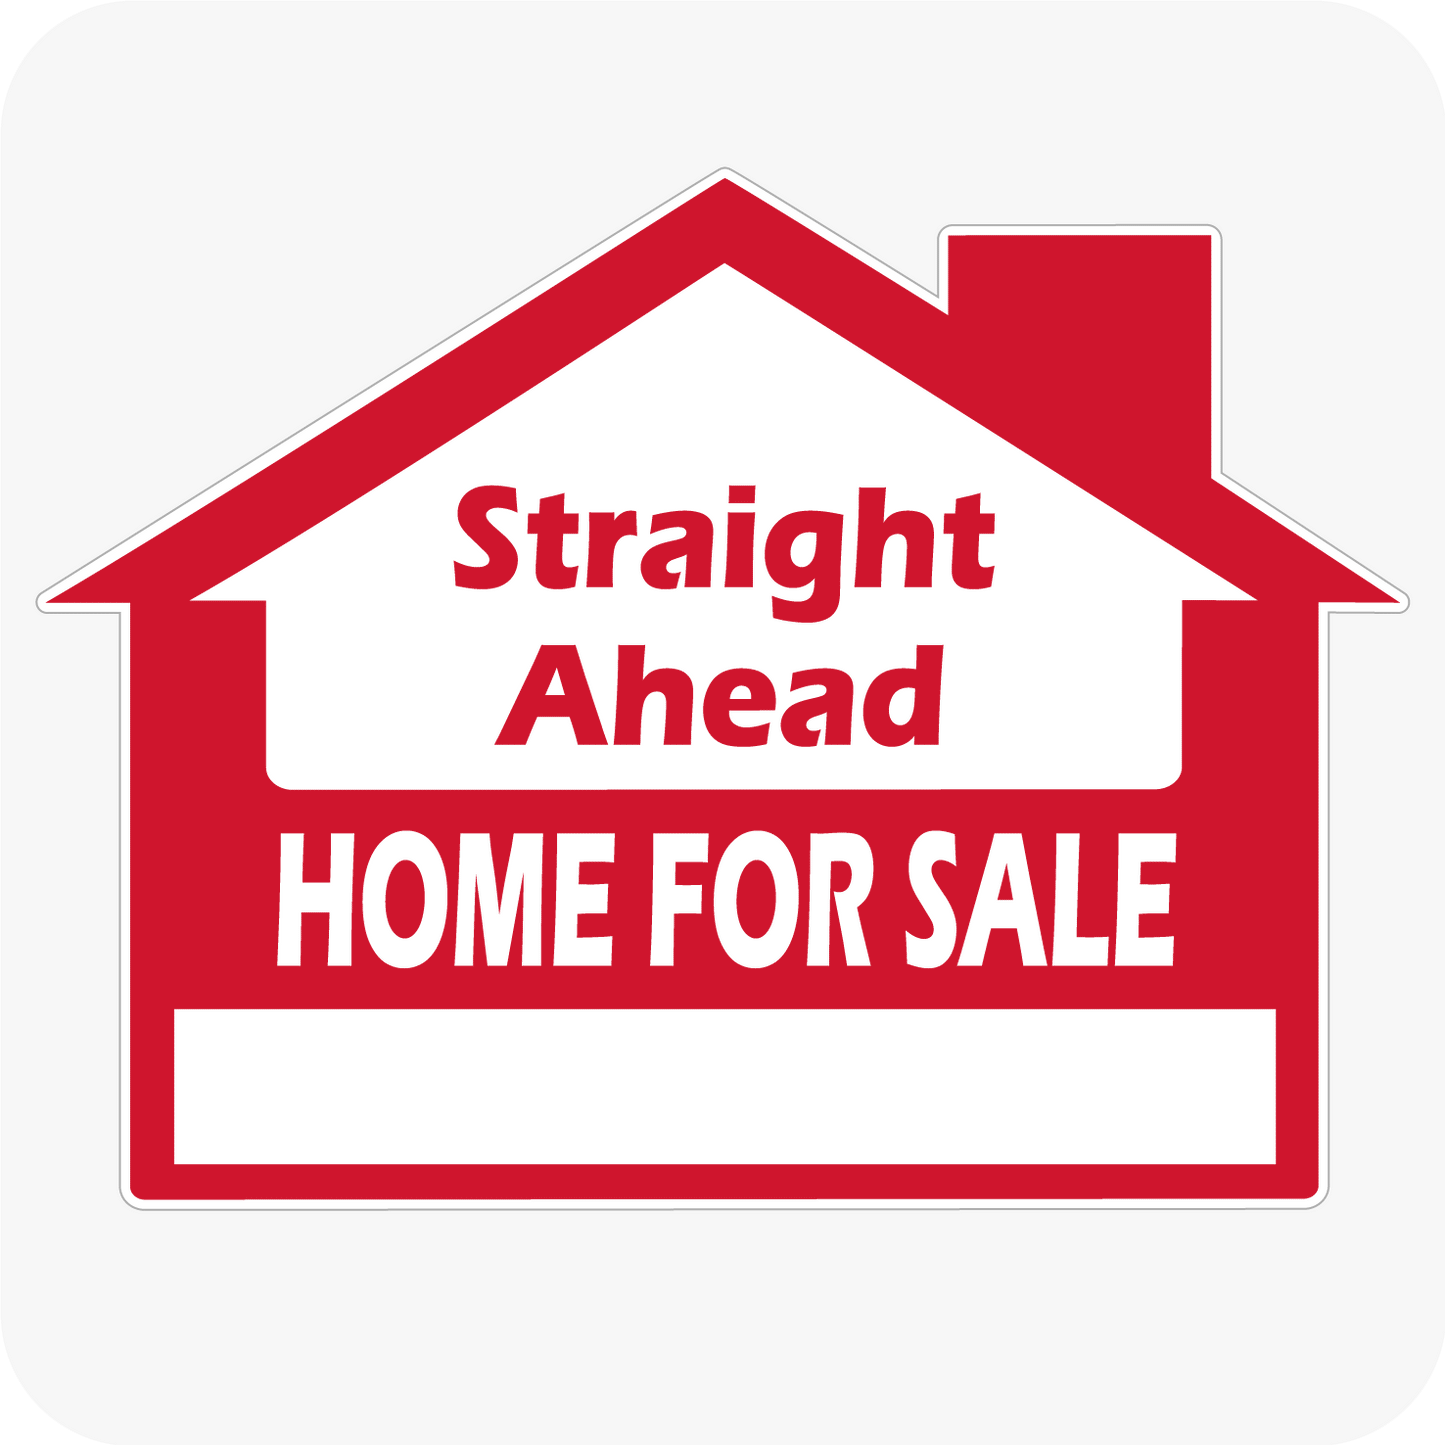 Home For Sale Straight Ahead - House Shaped Sign 18x24 - Red